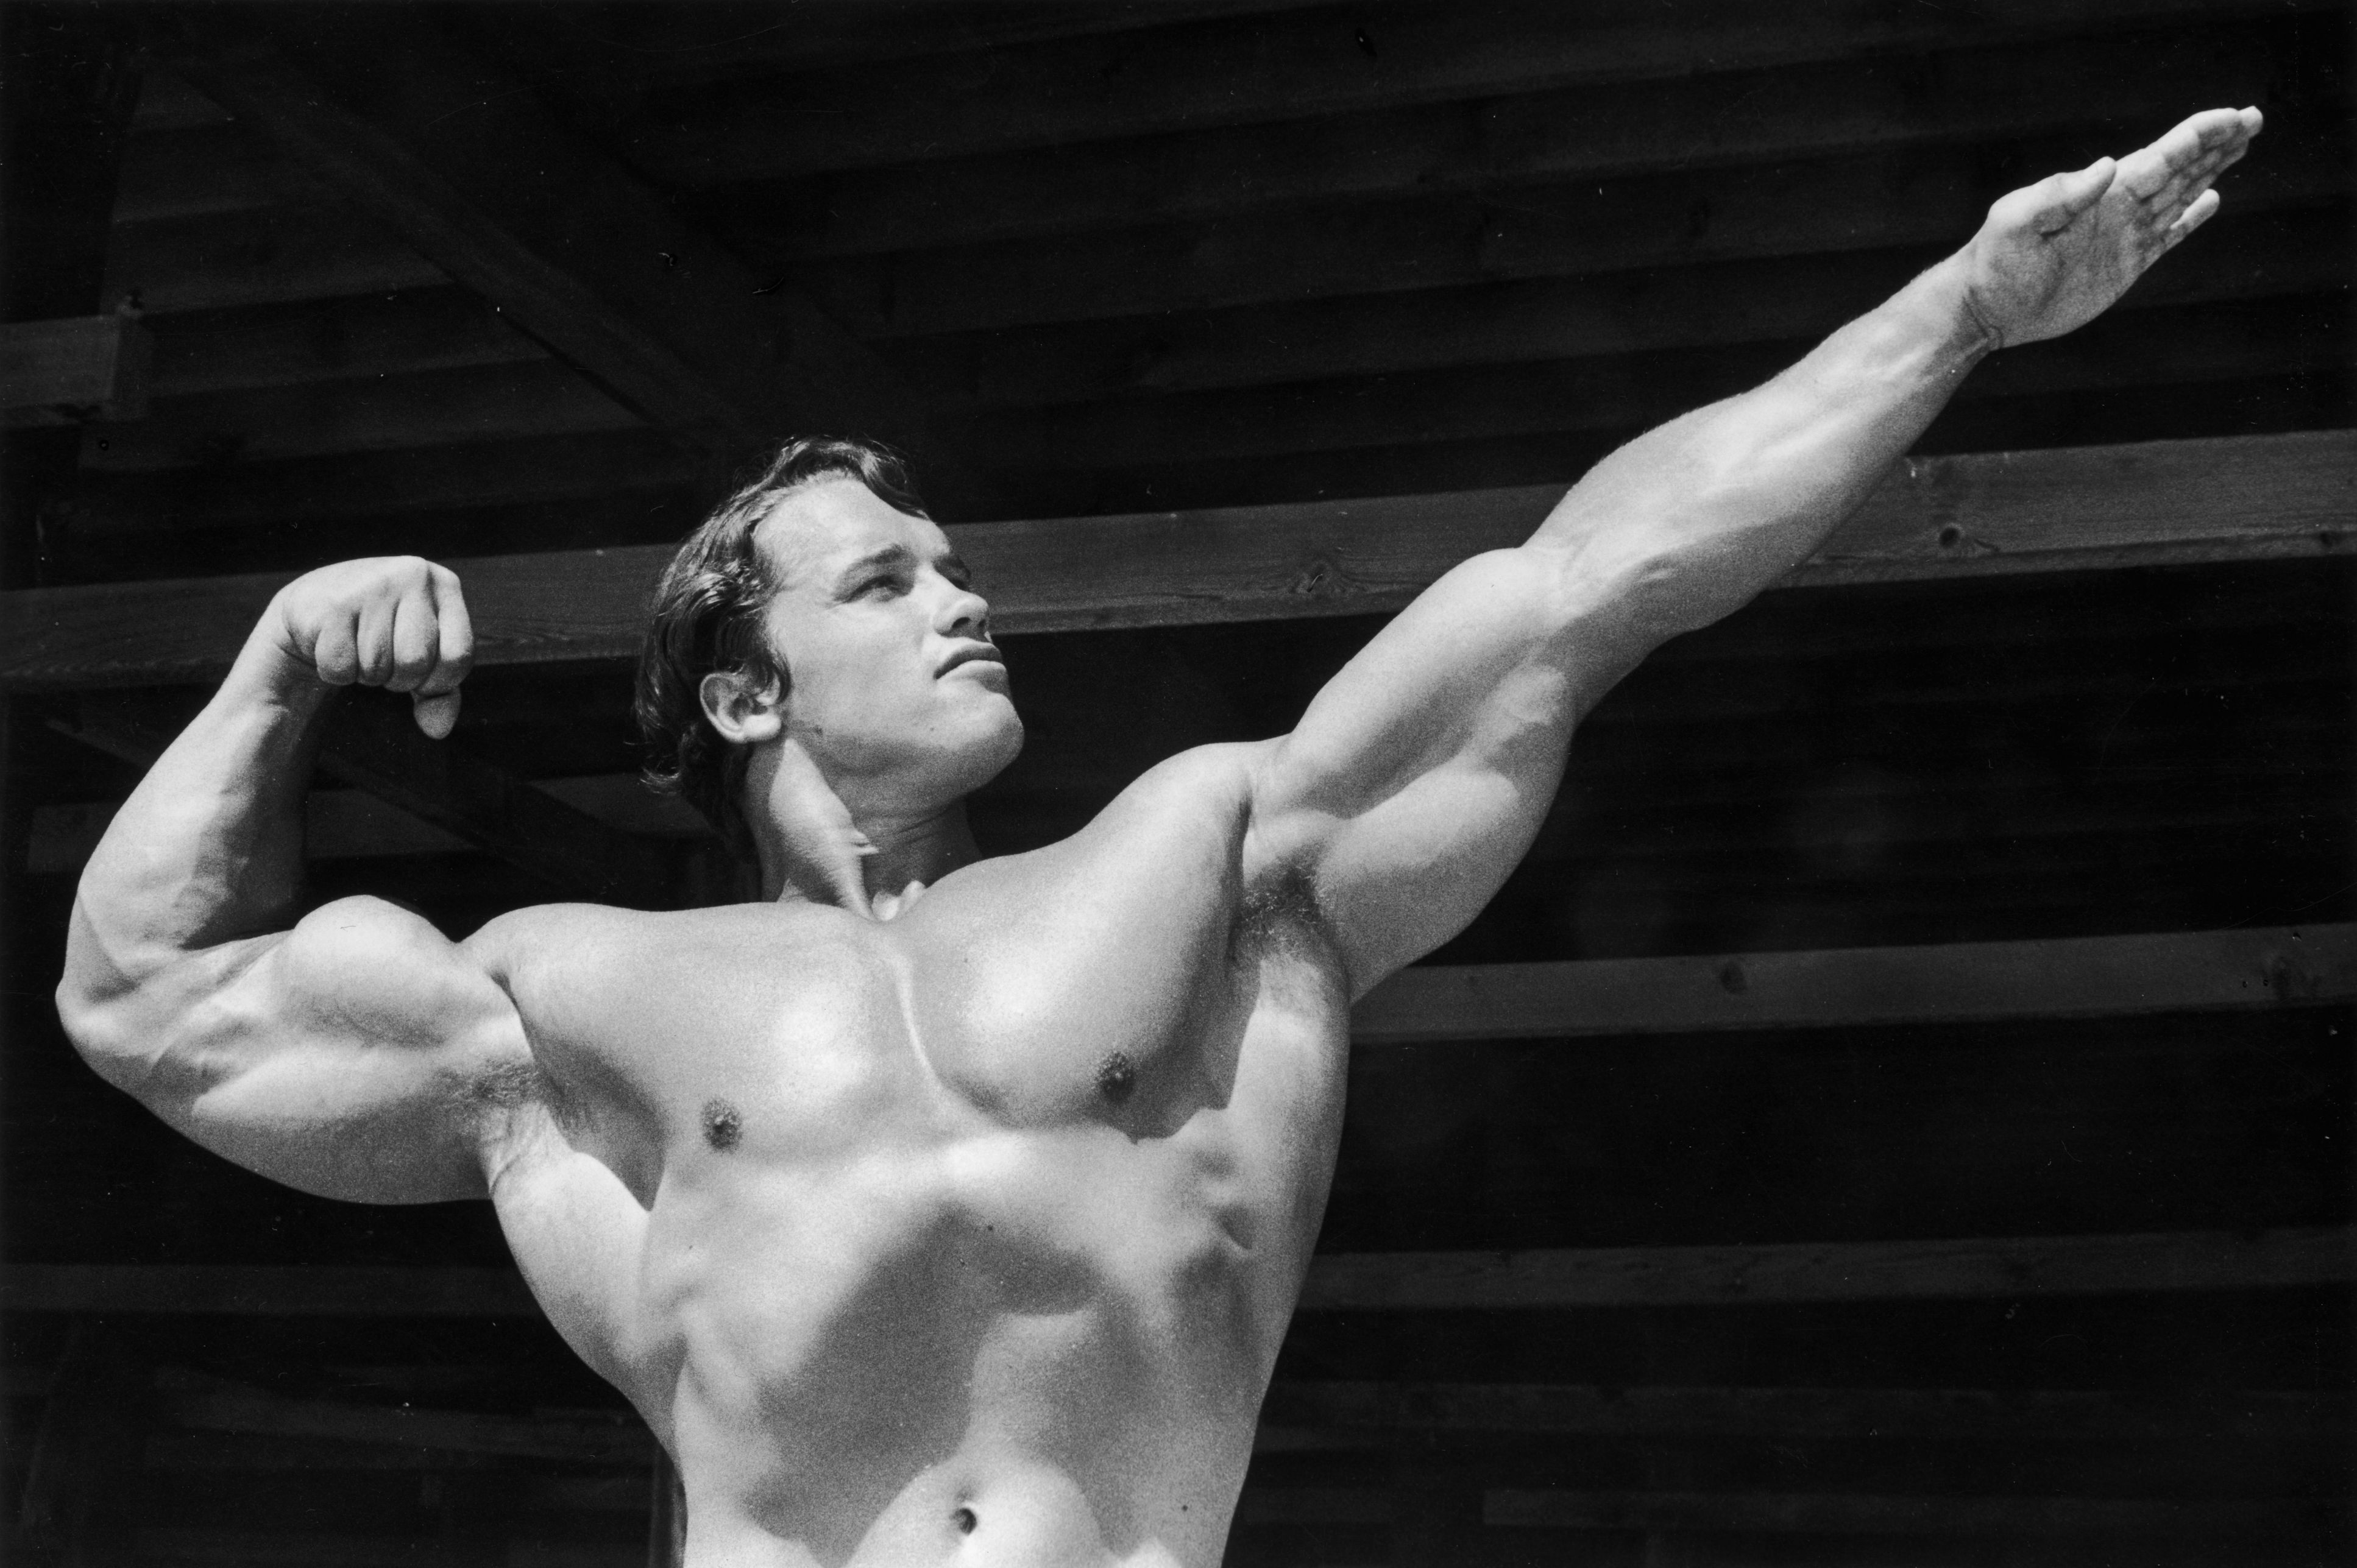 Arnold Schwarzenegger's 6 Bodybuilding Rules to Build Muscle